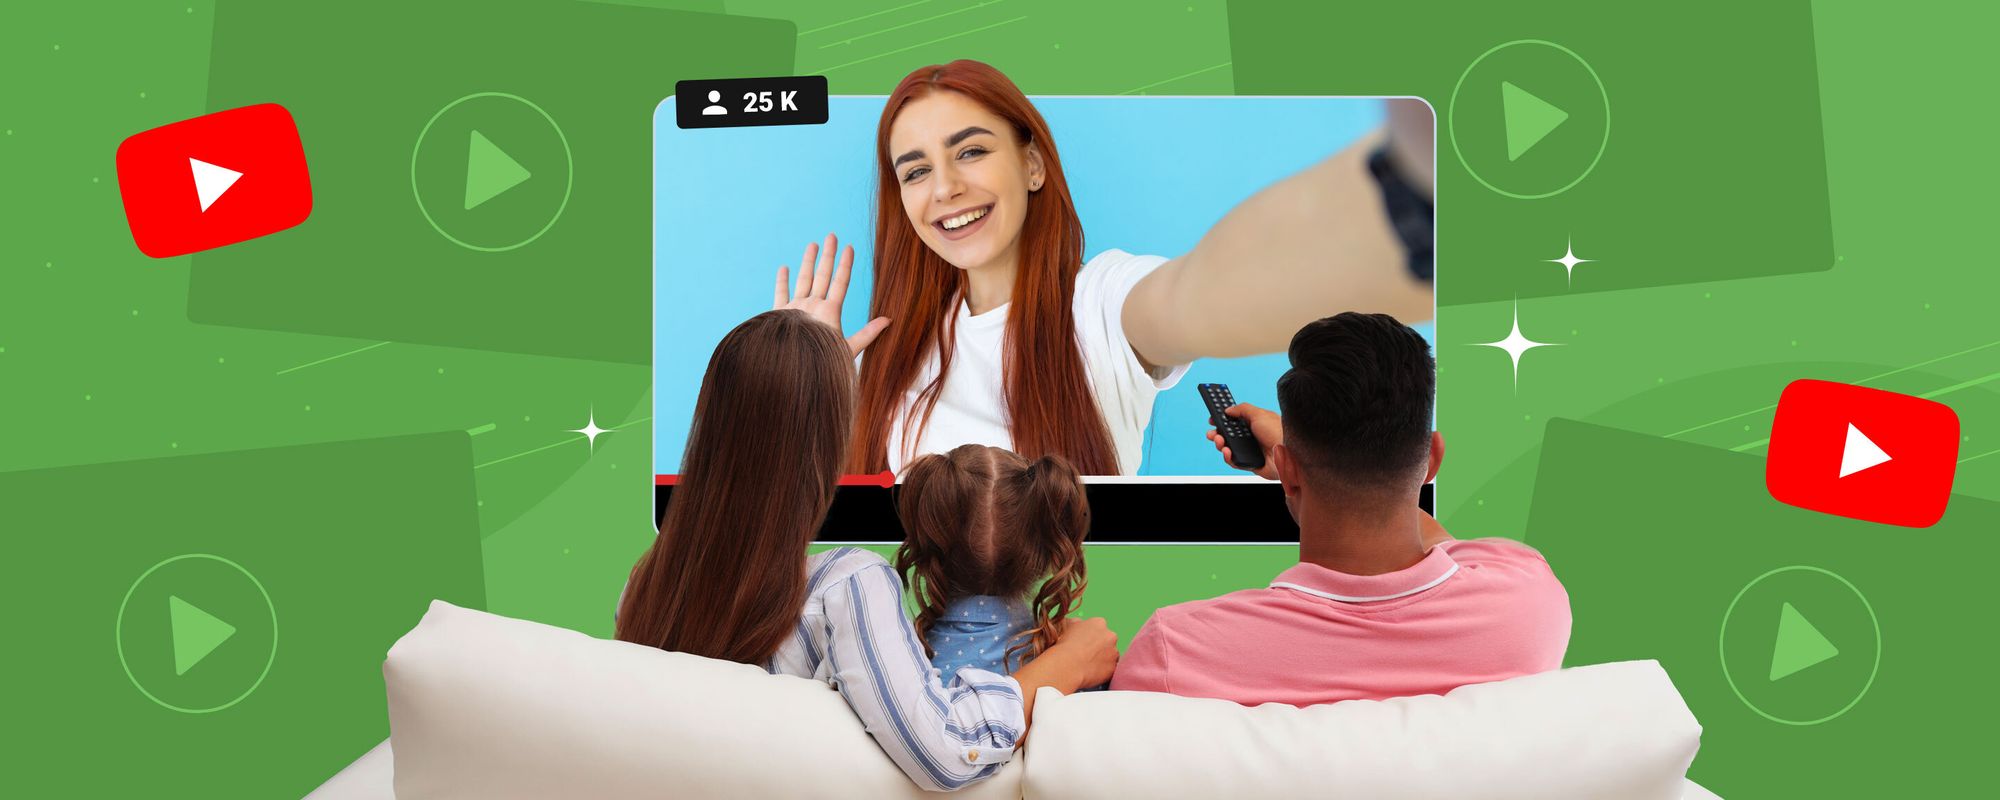 Image of a family watching a YouTube video to represent the concept of average view duration.